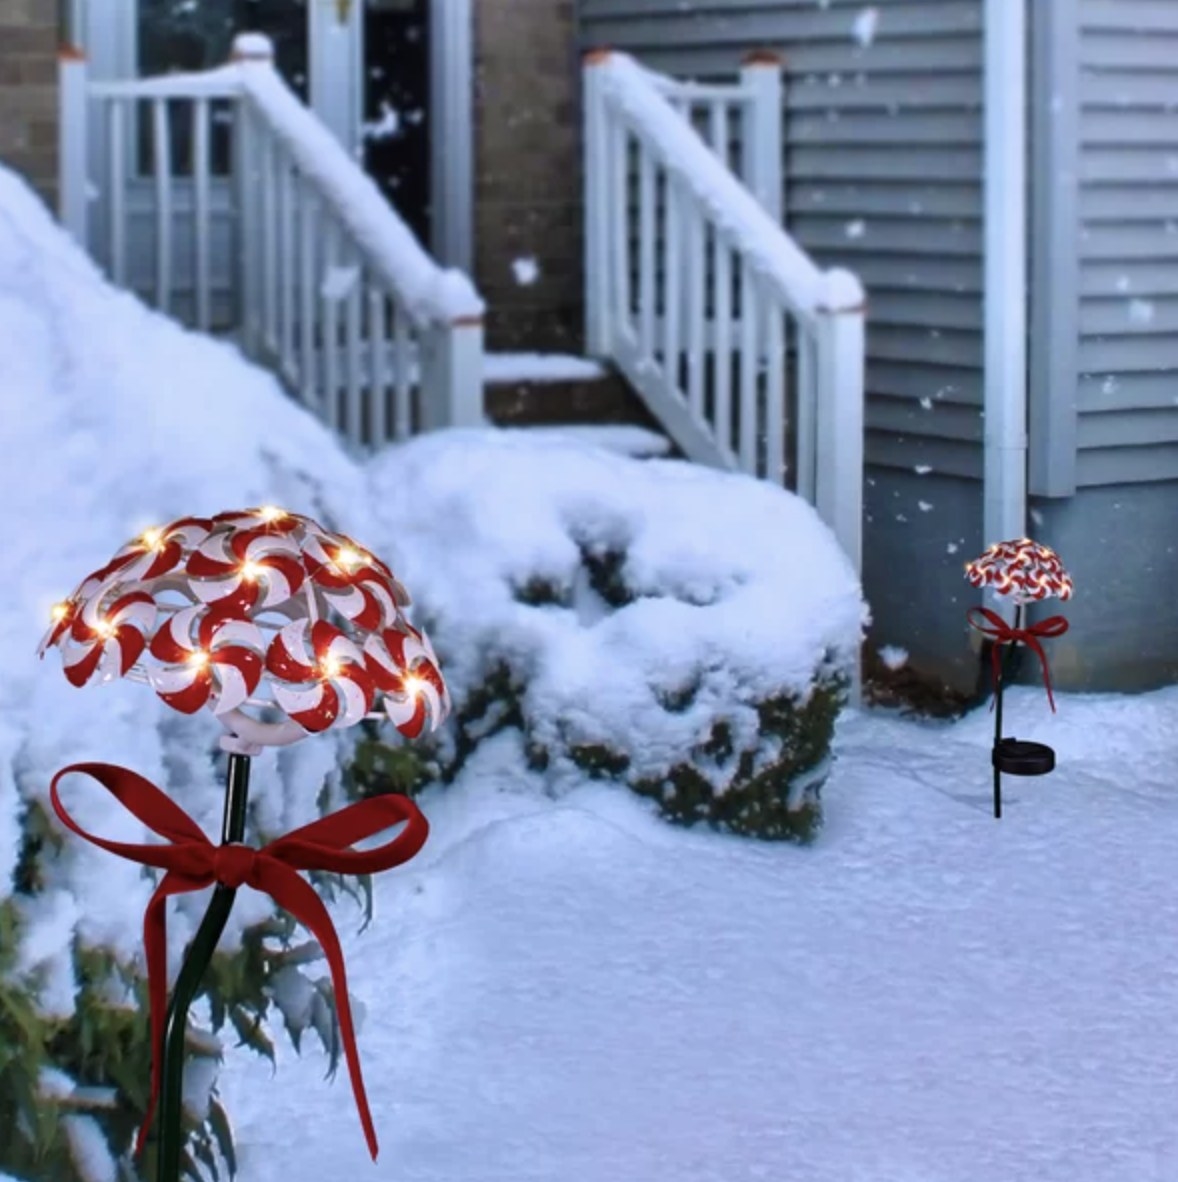 There are two peppermint dome-shaped garden stakes that are lit up with red ribbons placed in the ground near a snowy porch